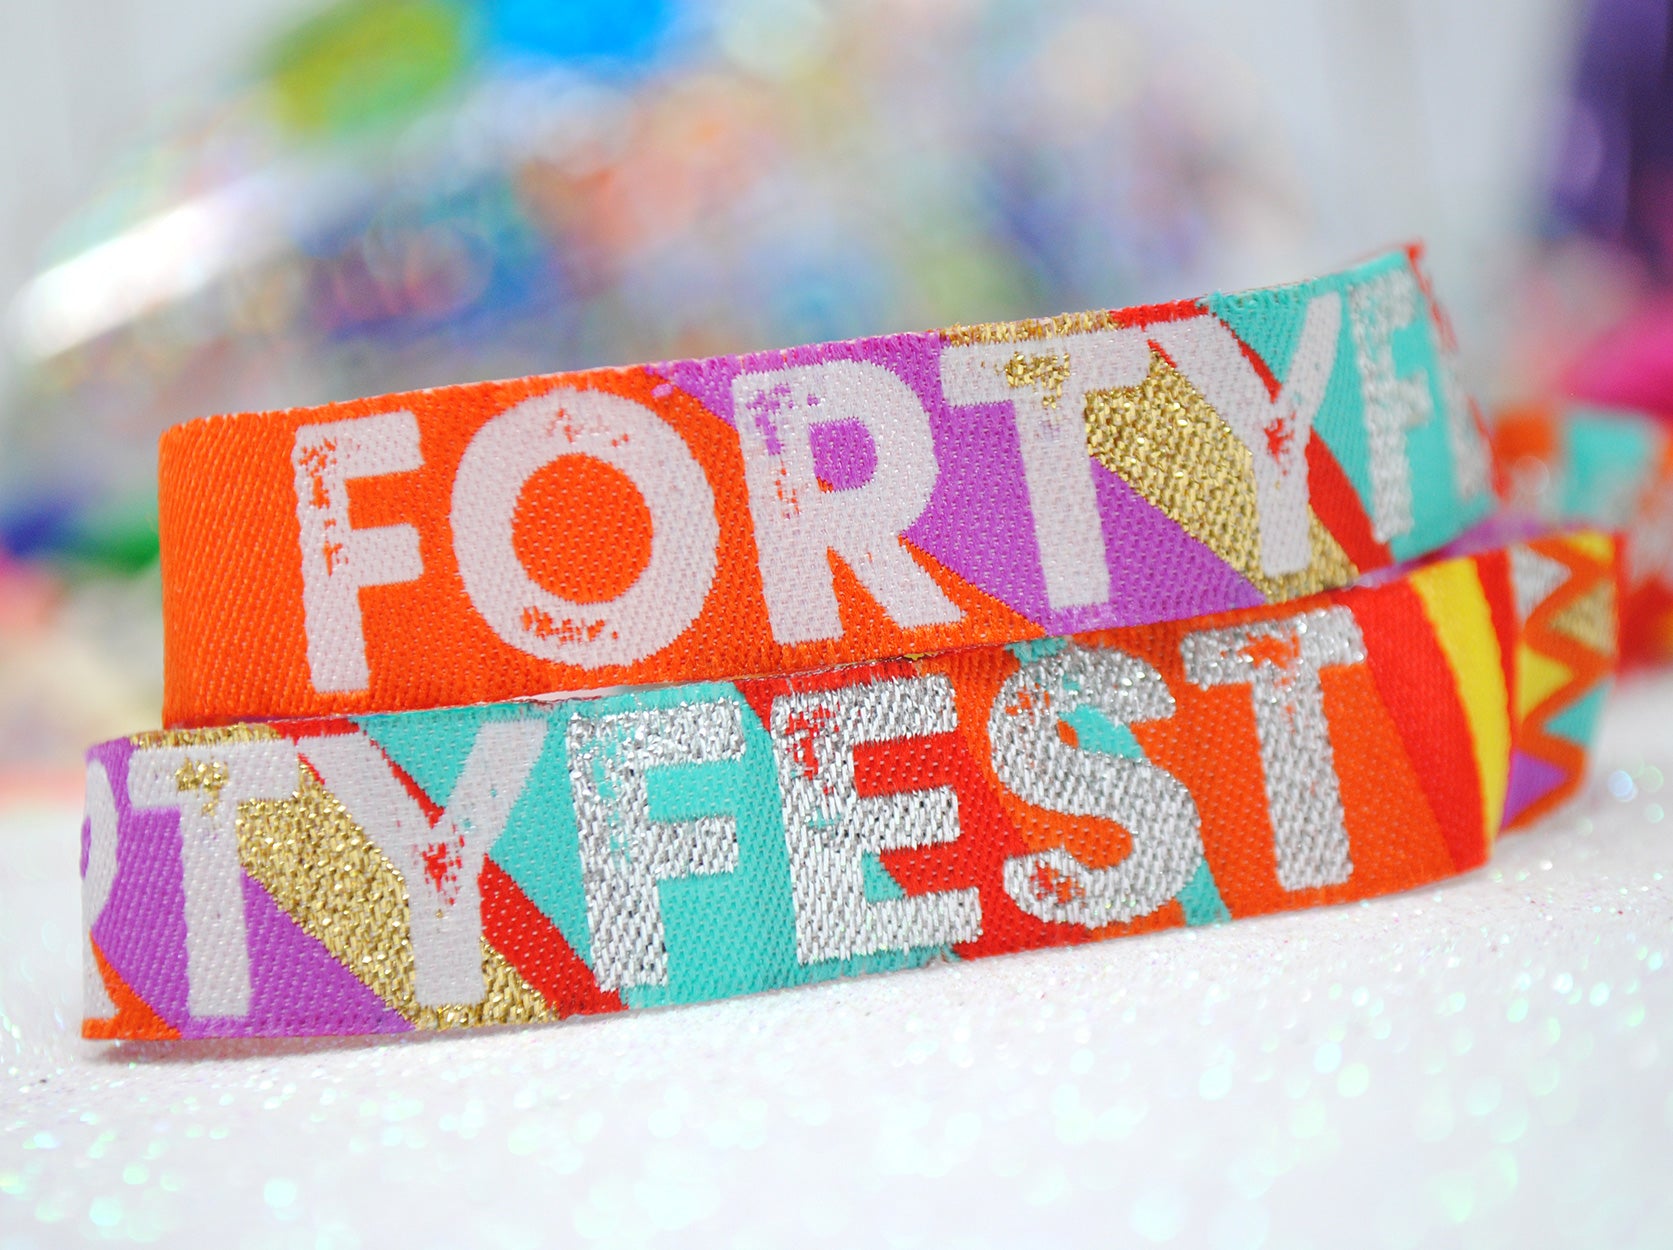 festival themed 40th birthday party wristbands